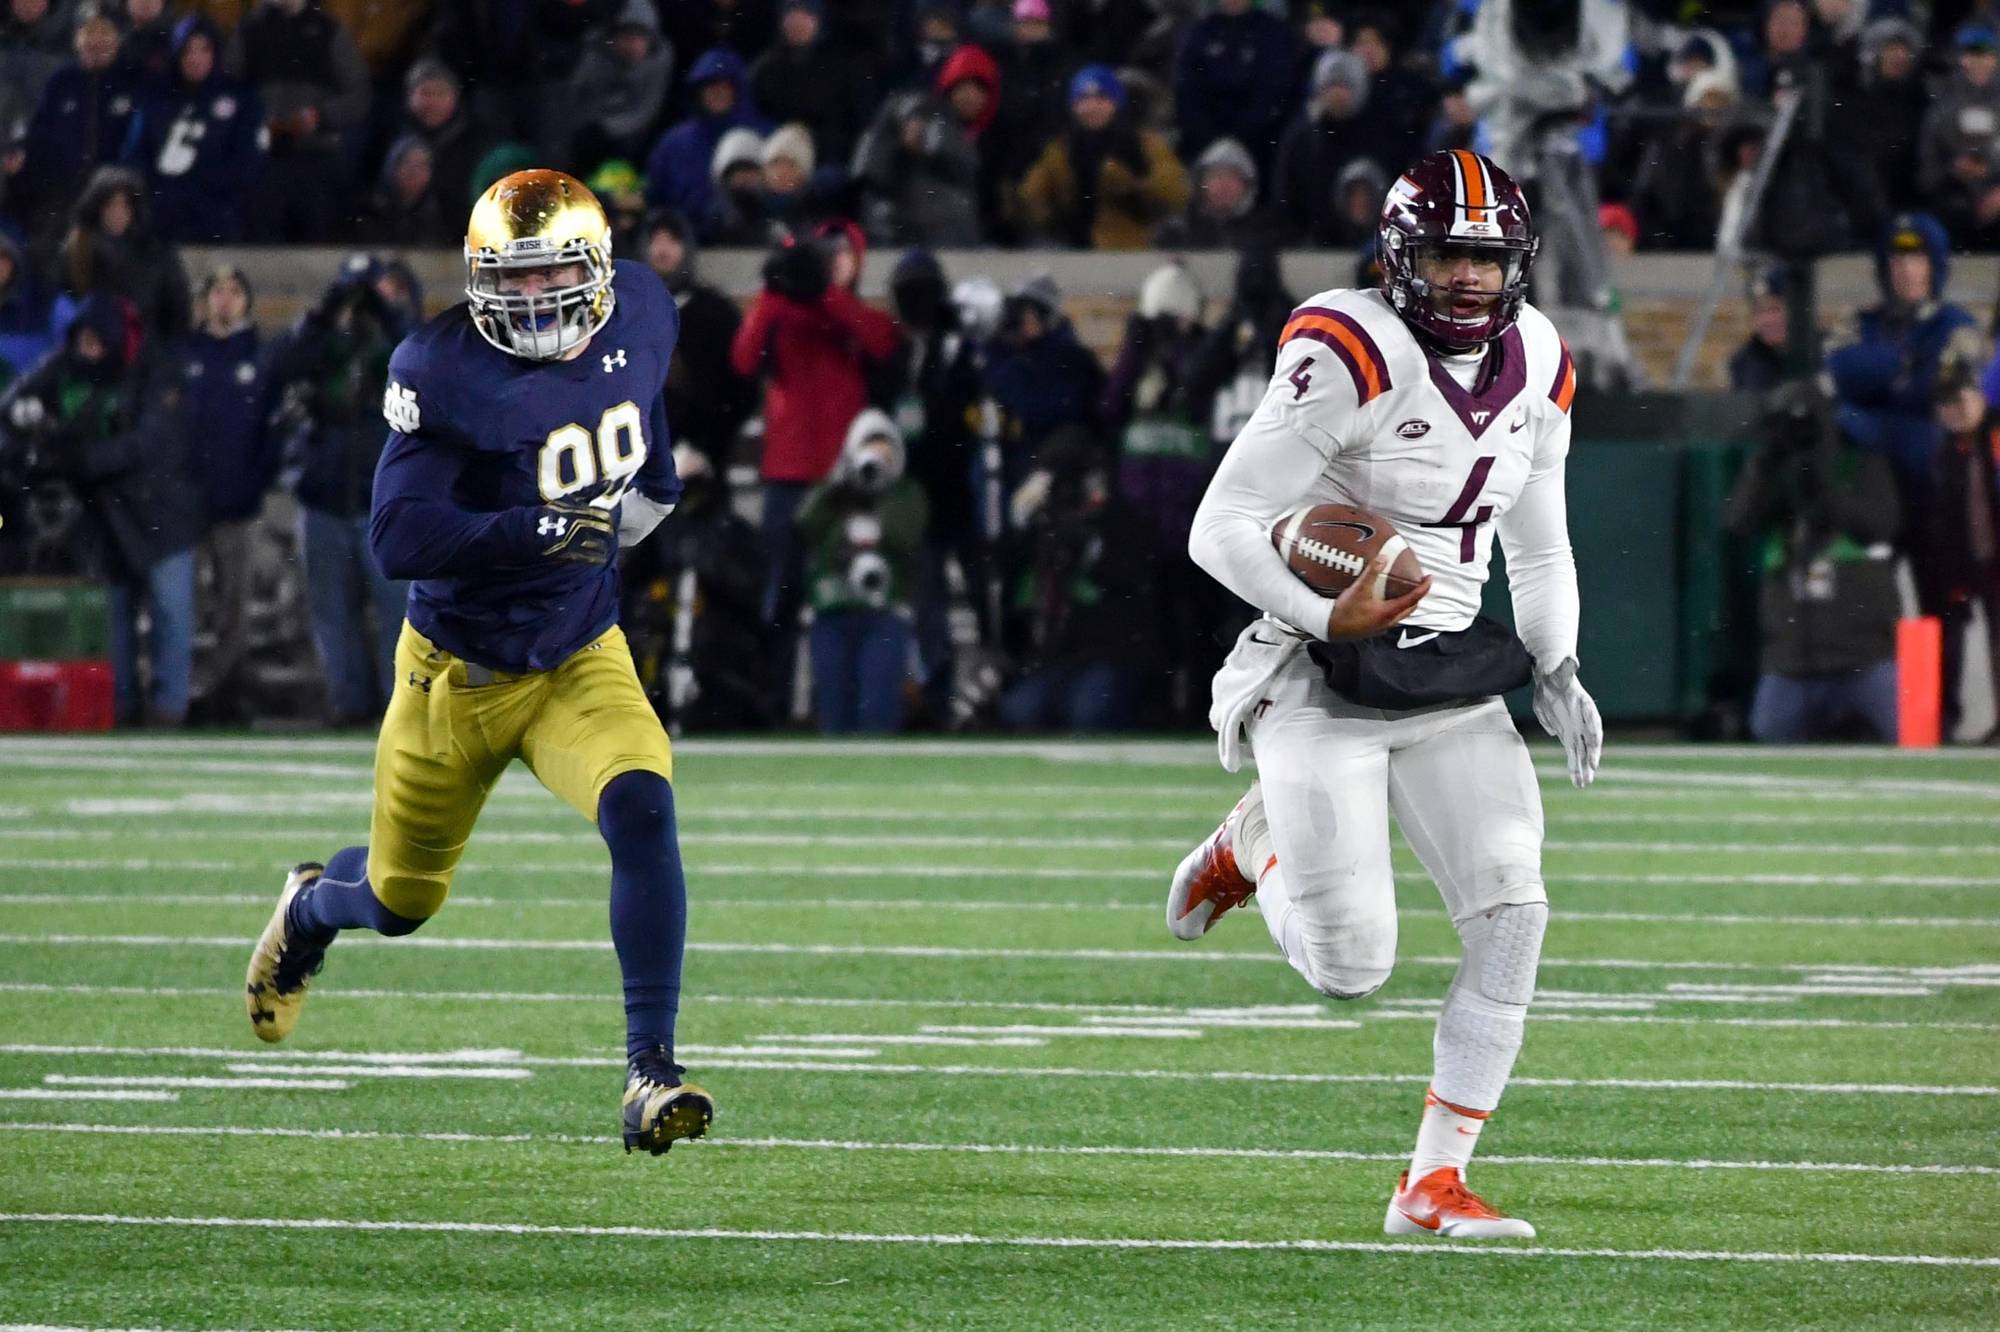 Notre Dame Blows 17 Point Lead and Bowl Chances